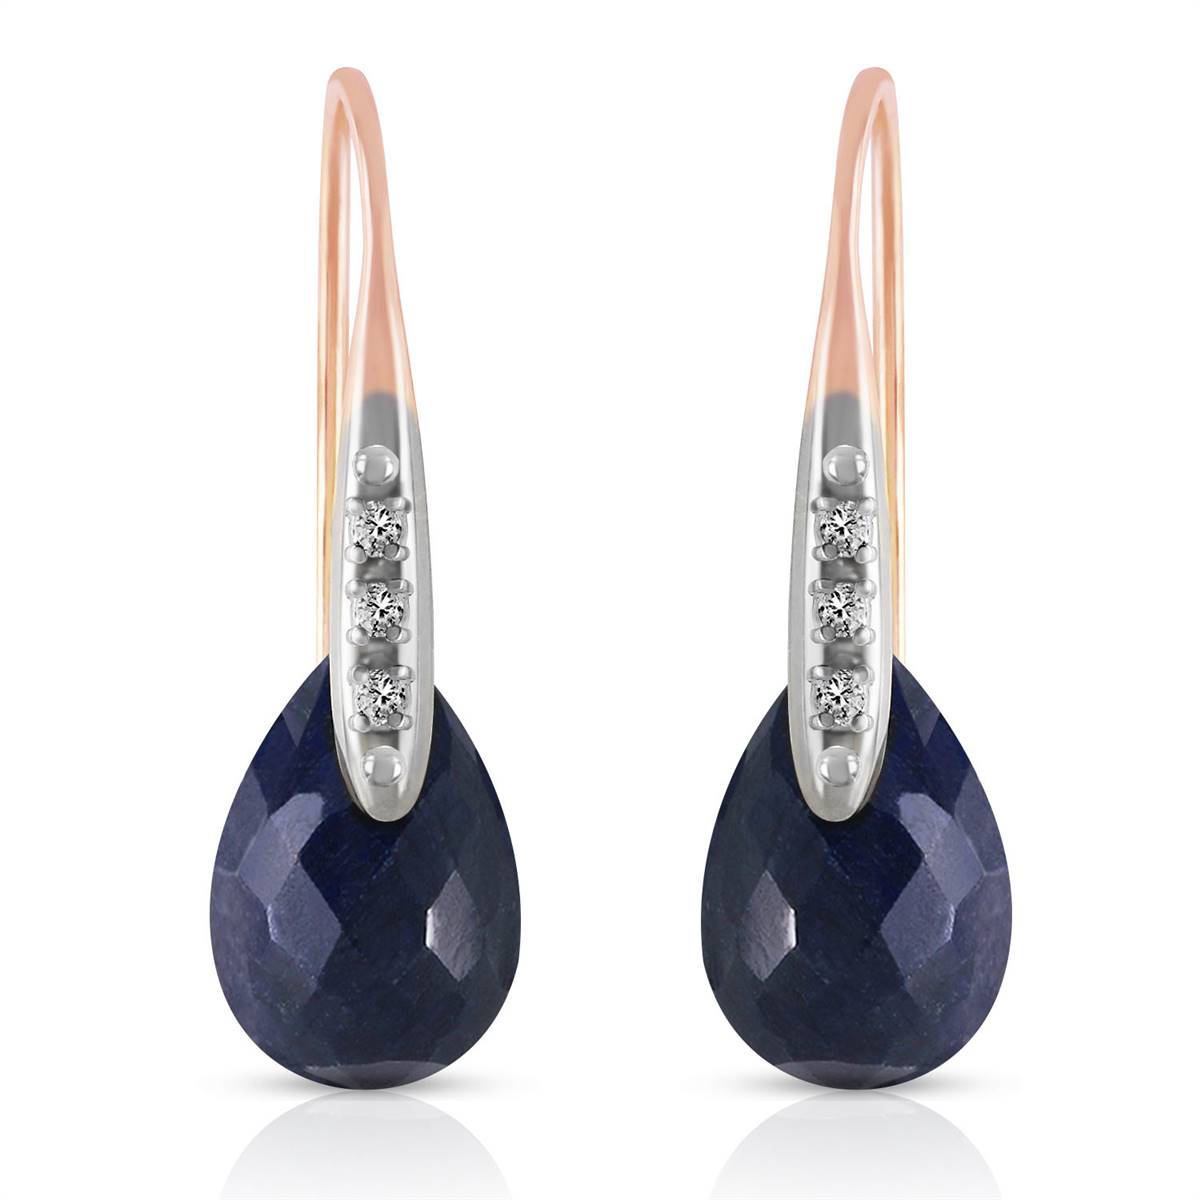 14K Solid Rose Gold Fish Hook Earrings w/ Diamonds & Dangling Dyed Sapphires